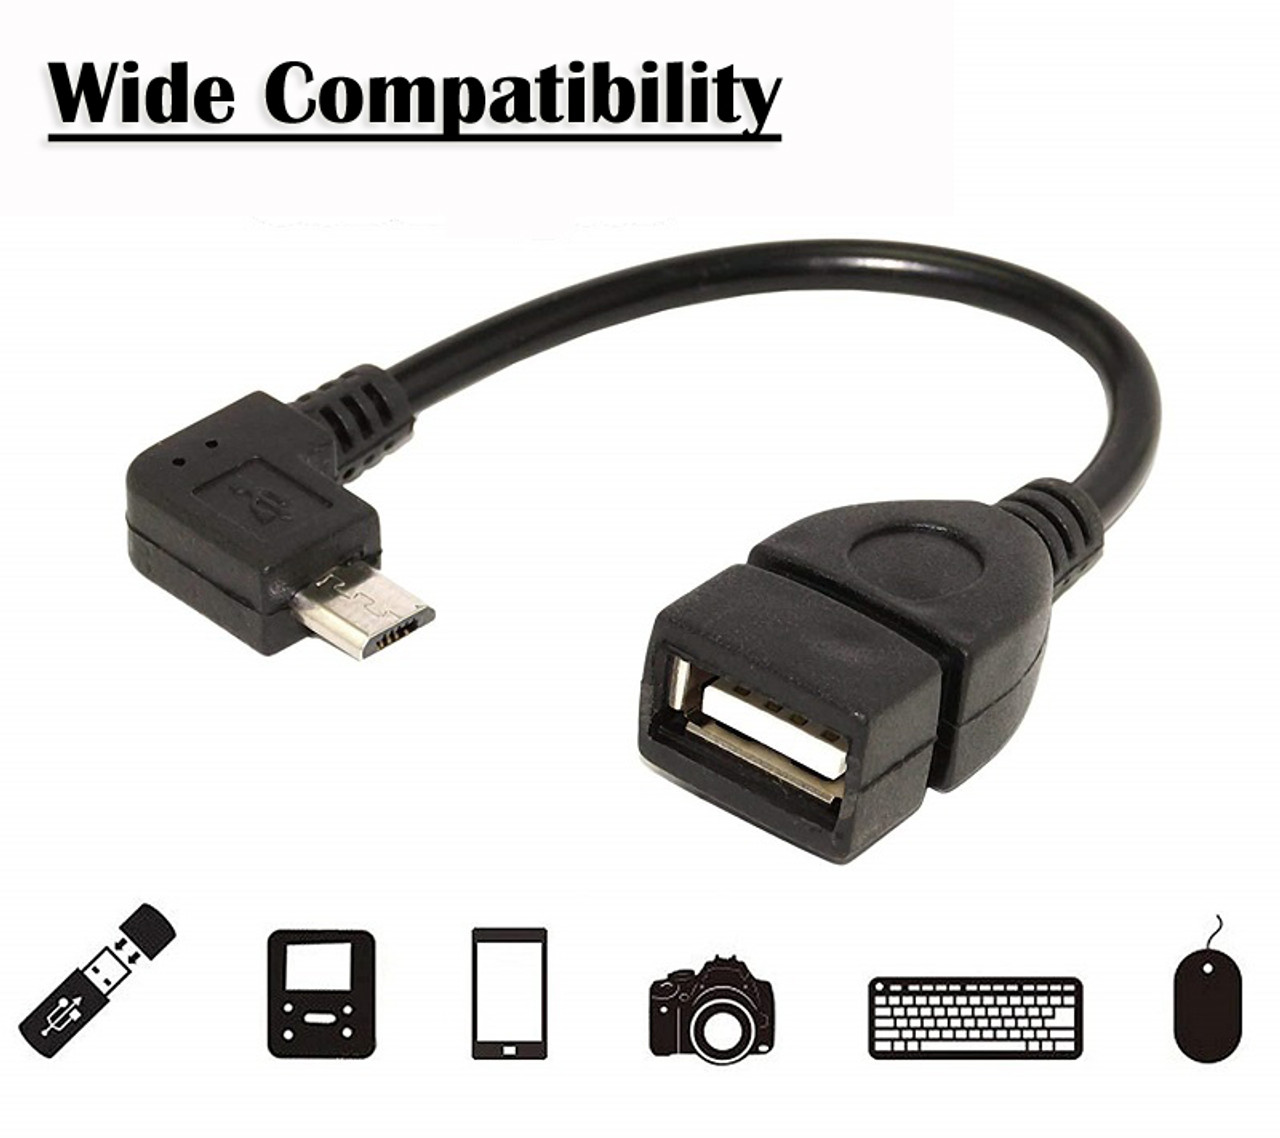 90° Degree Left Angled Micro USB OTG (On-The-Go) Adapter Cable Elbow Long Plug USB Hosting Connection Cord Black For Tablet Mobile Phone